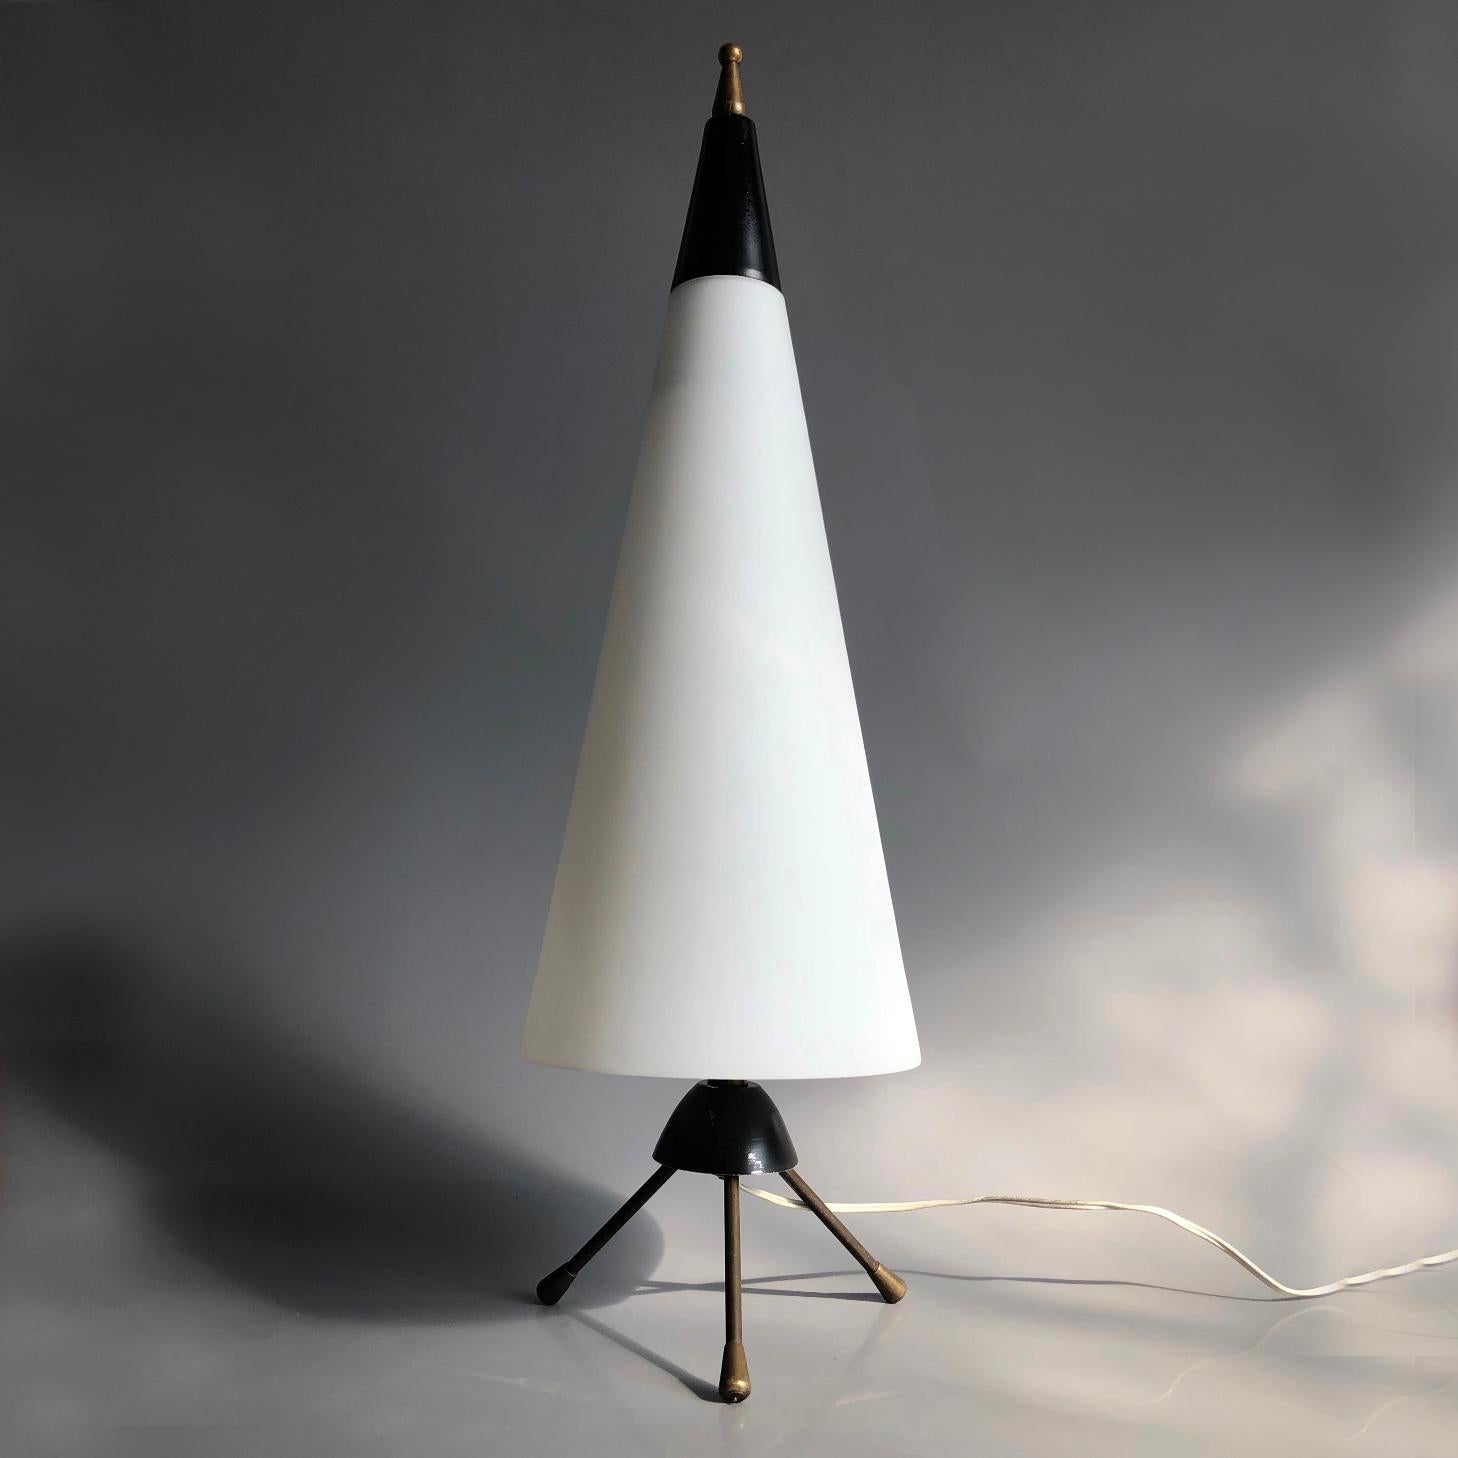 Space Age modernist table lamp, Italy, 1960s. Conical satinated milk glass shade, metal structure wirh brass tripod base. Black painted metal parts. Very good original condition. Two original Italian brass E14 sockets with original and functioning